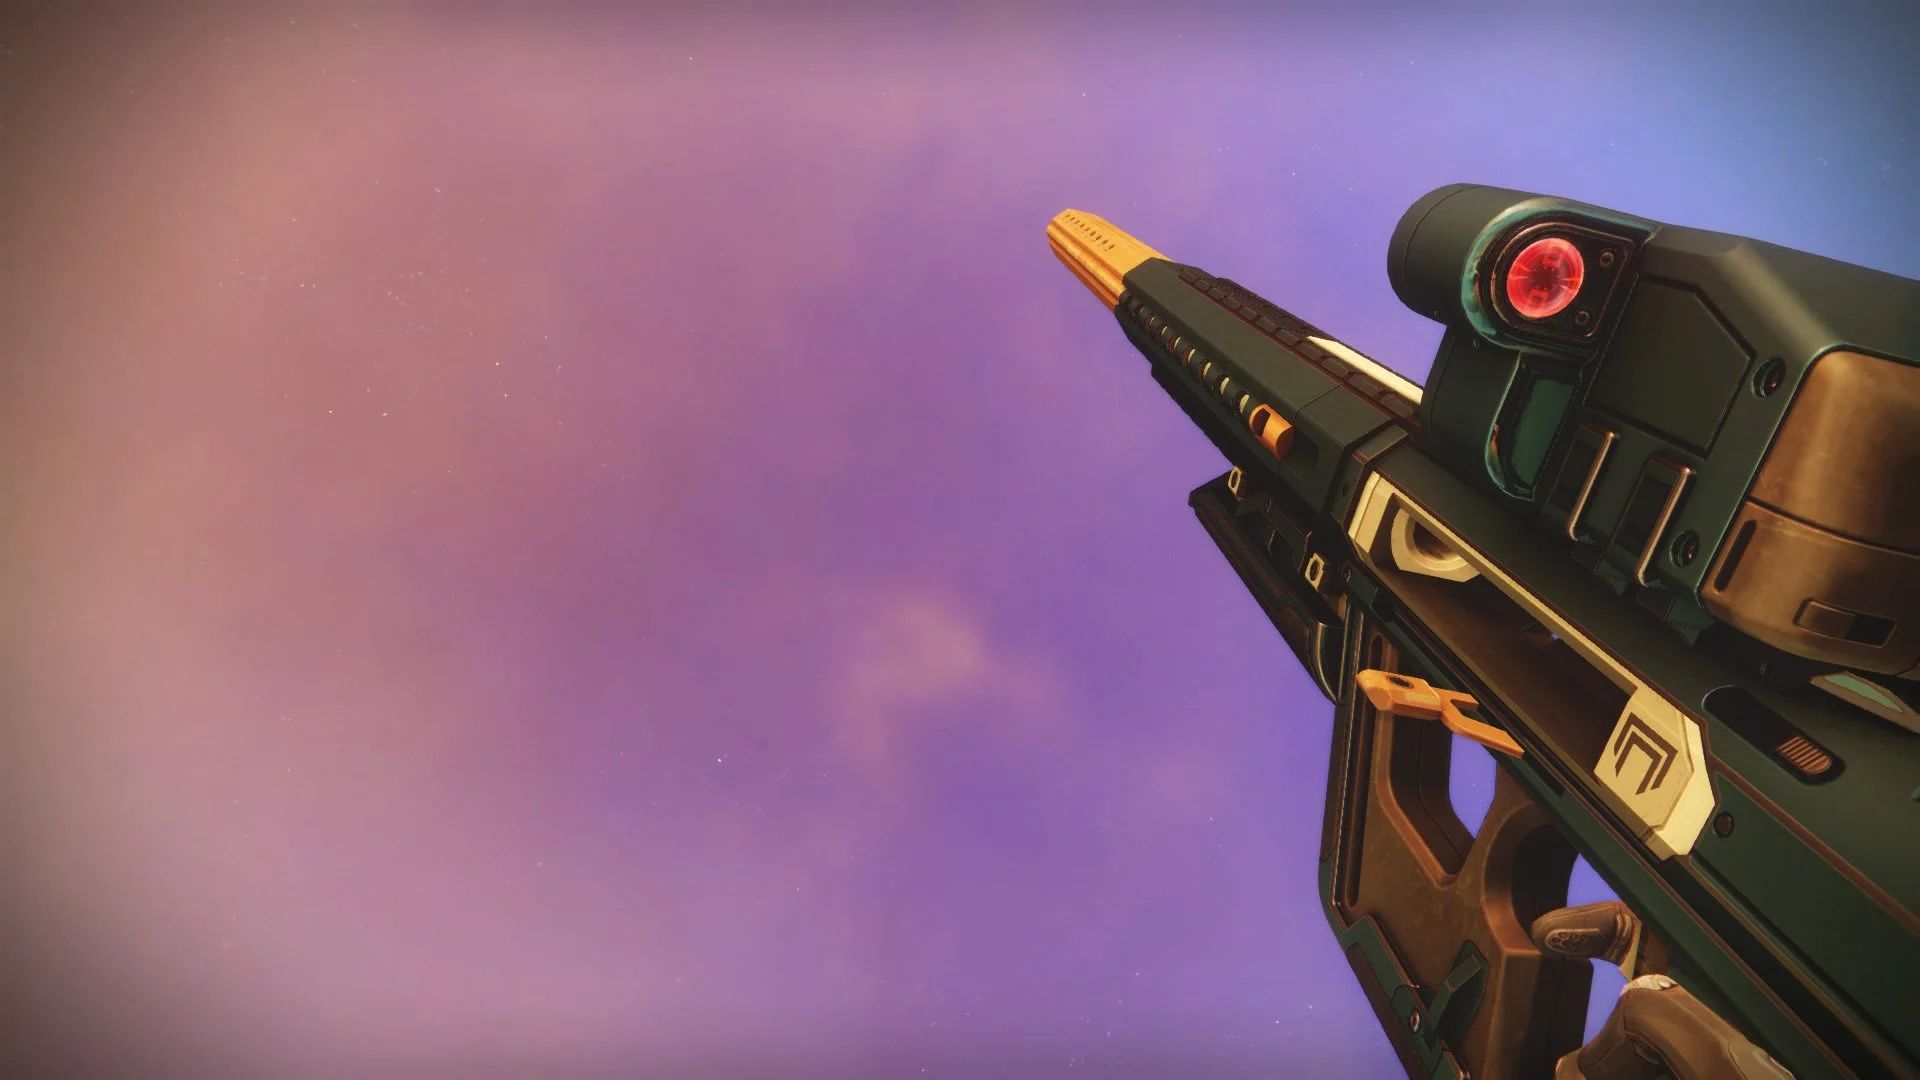 In this article, we are going to go over how to get Trophy Hunter Destiny 2, so you can get this rifle and incorporate it into your build.